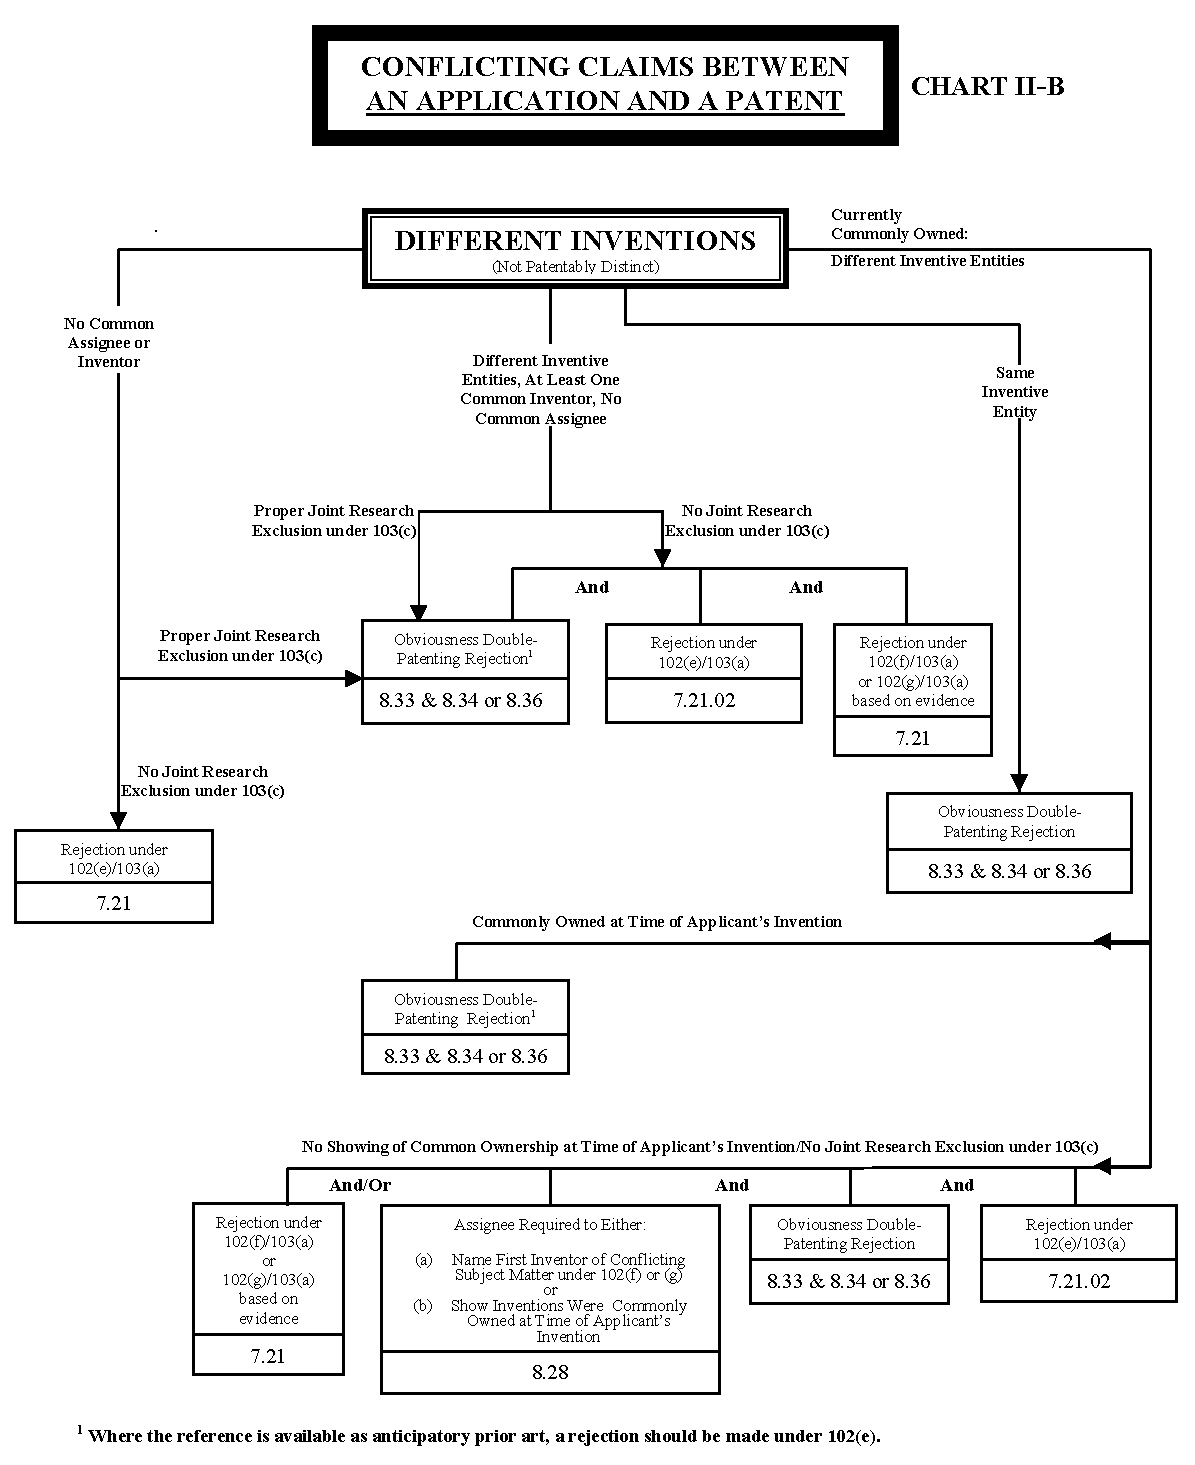 flowchart for an application and a patent, different inventions, with conflicting claims